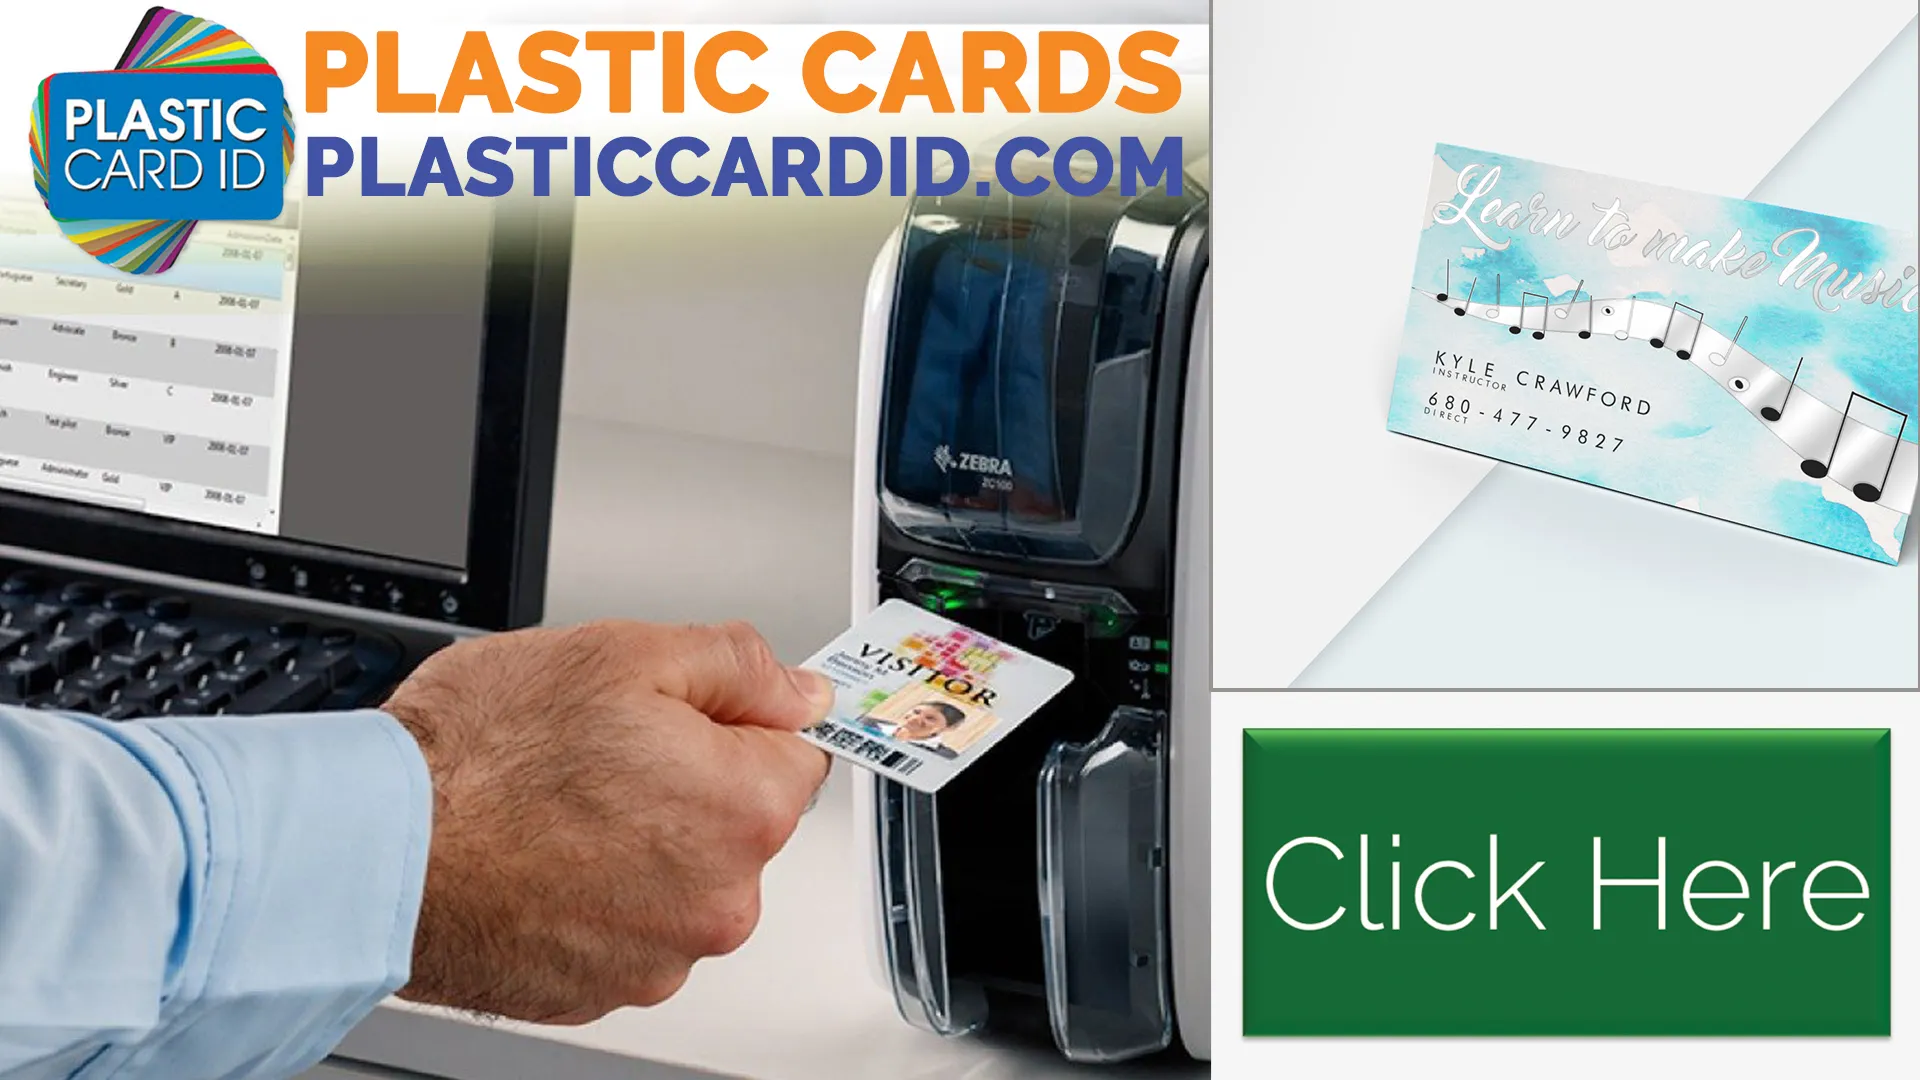 Welcome to Plastic Card ID
: Where First Impressions Shine Bright